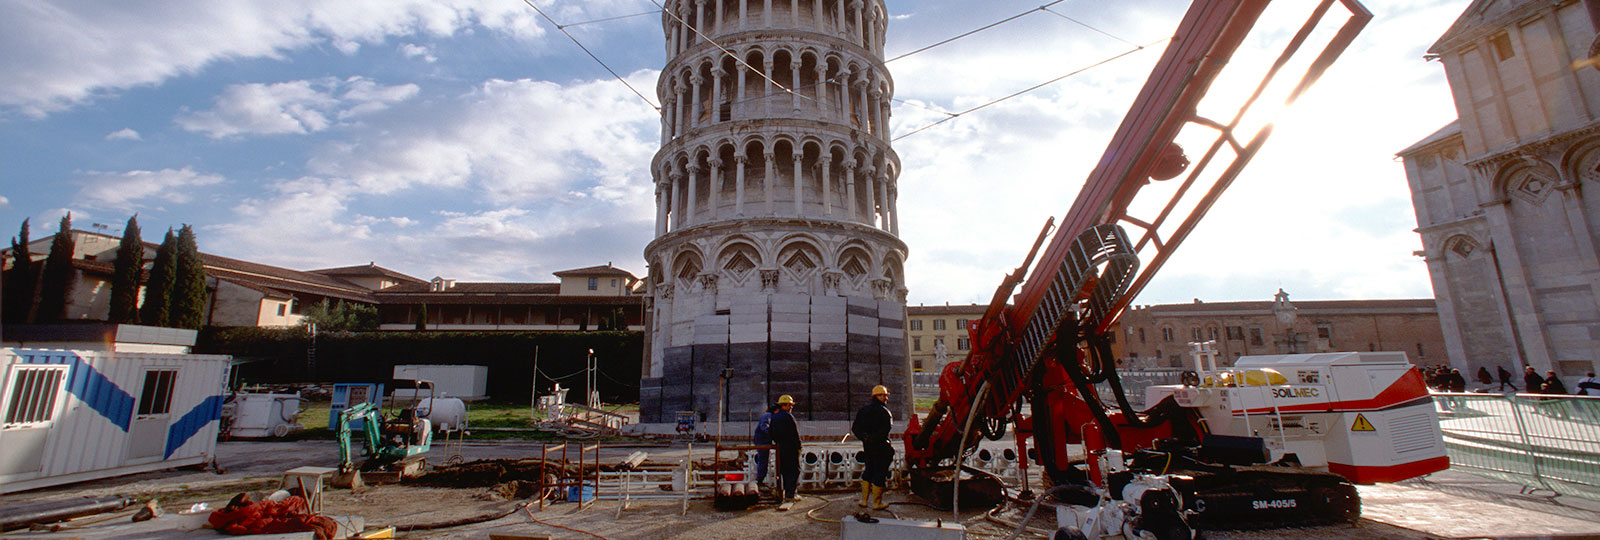 THE LEANING TOWER OF PISA